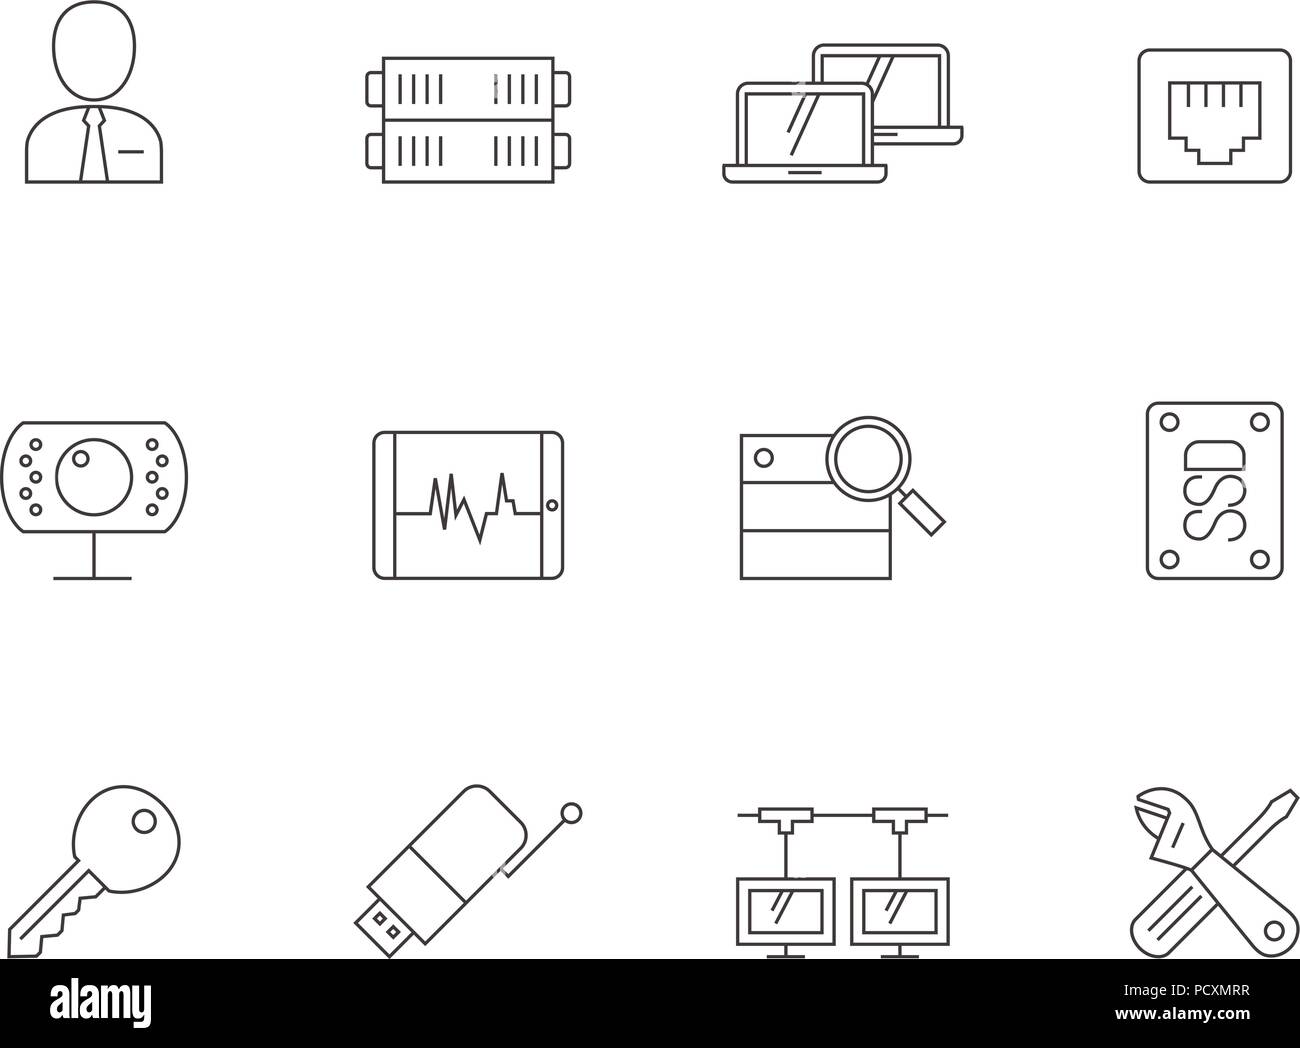 Outline Icons - More Computer Network Stock Vector